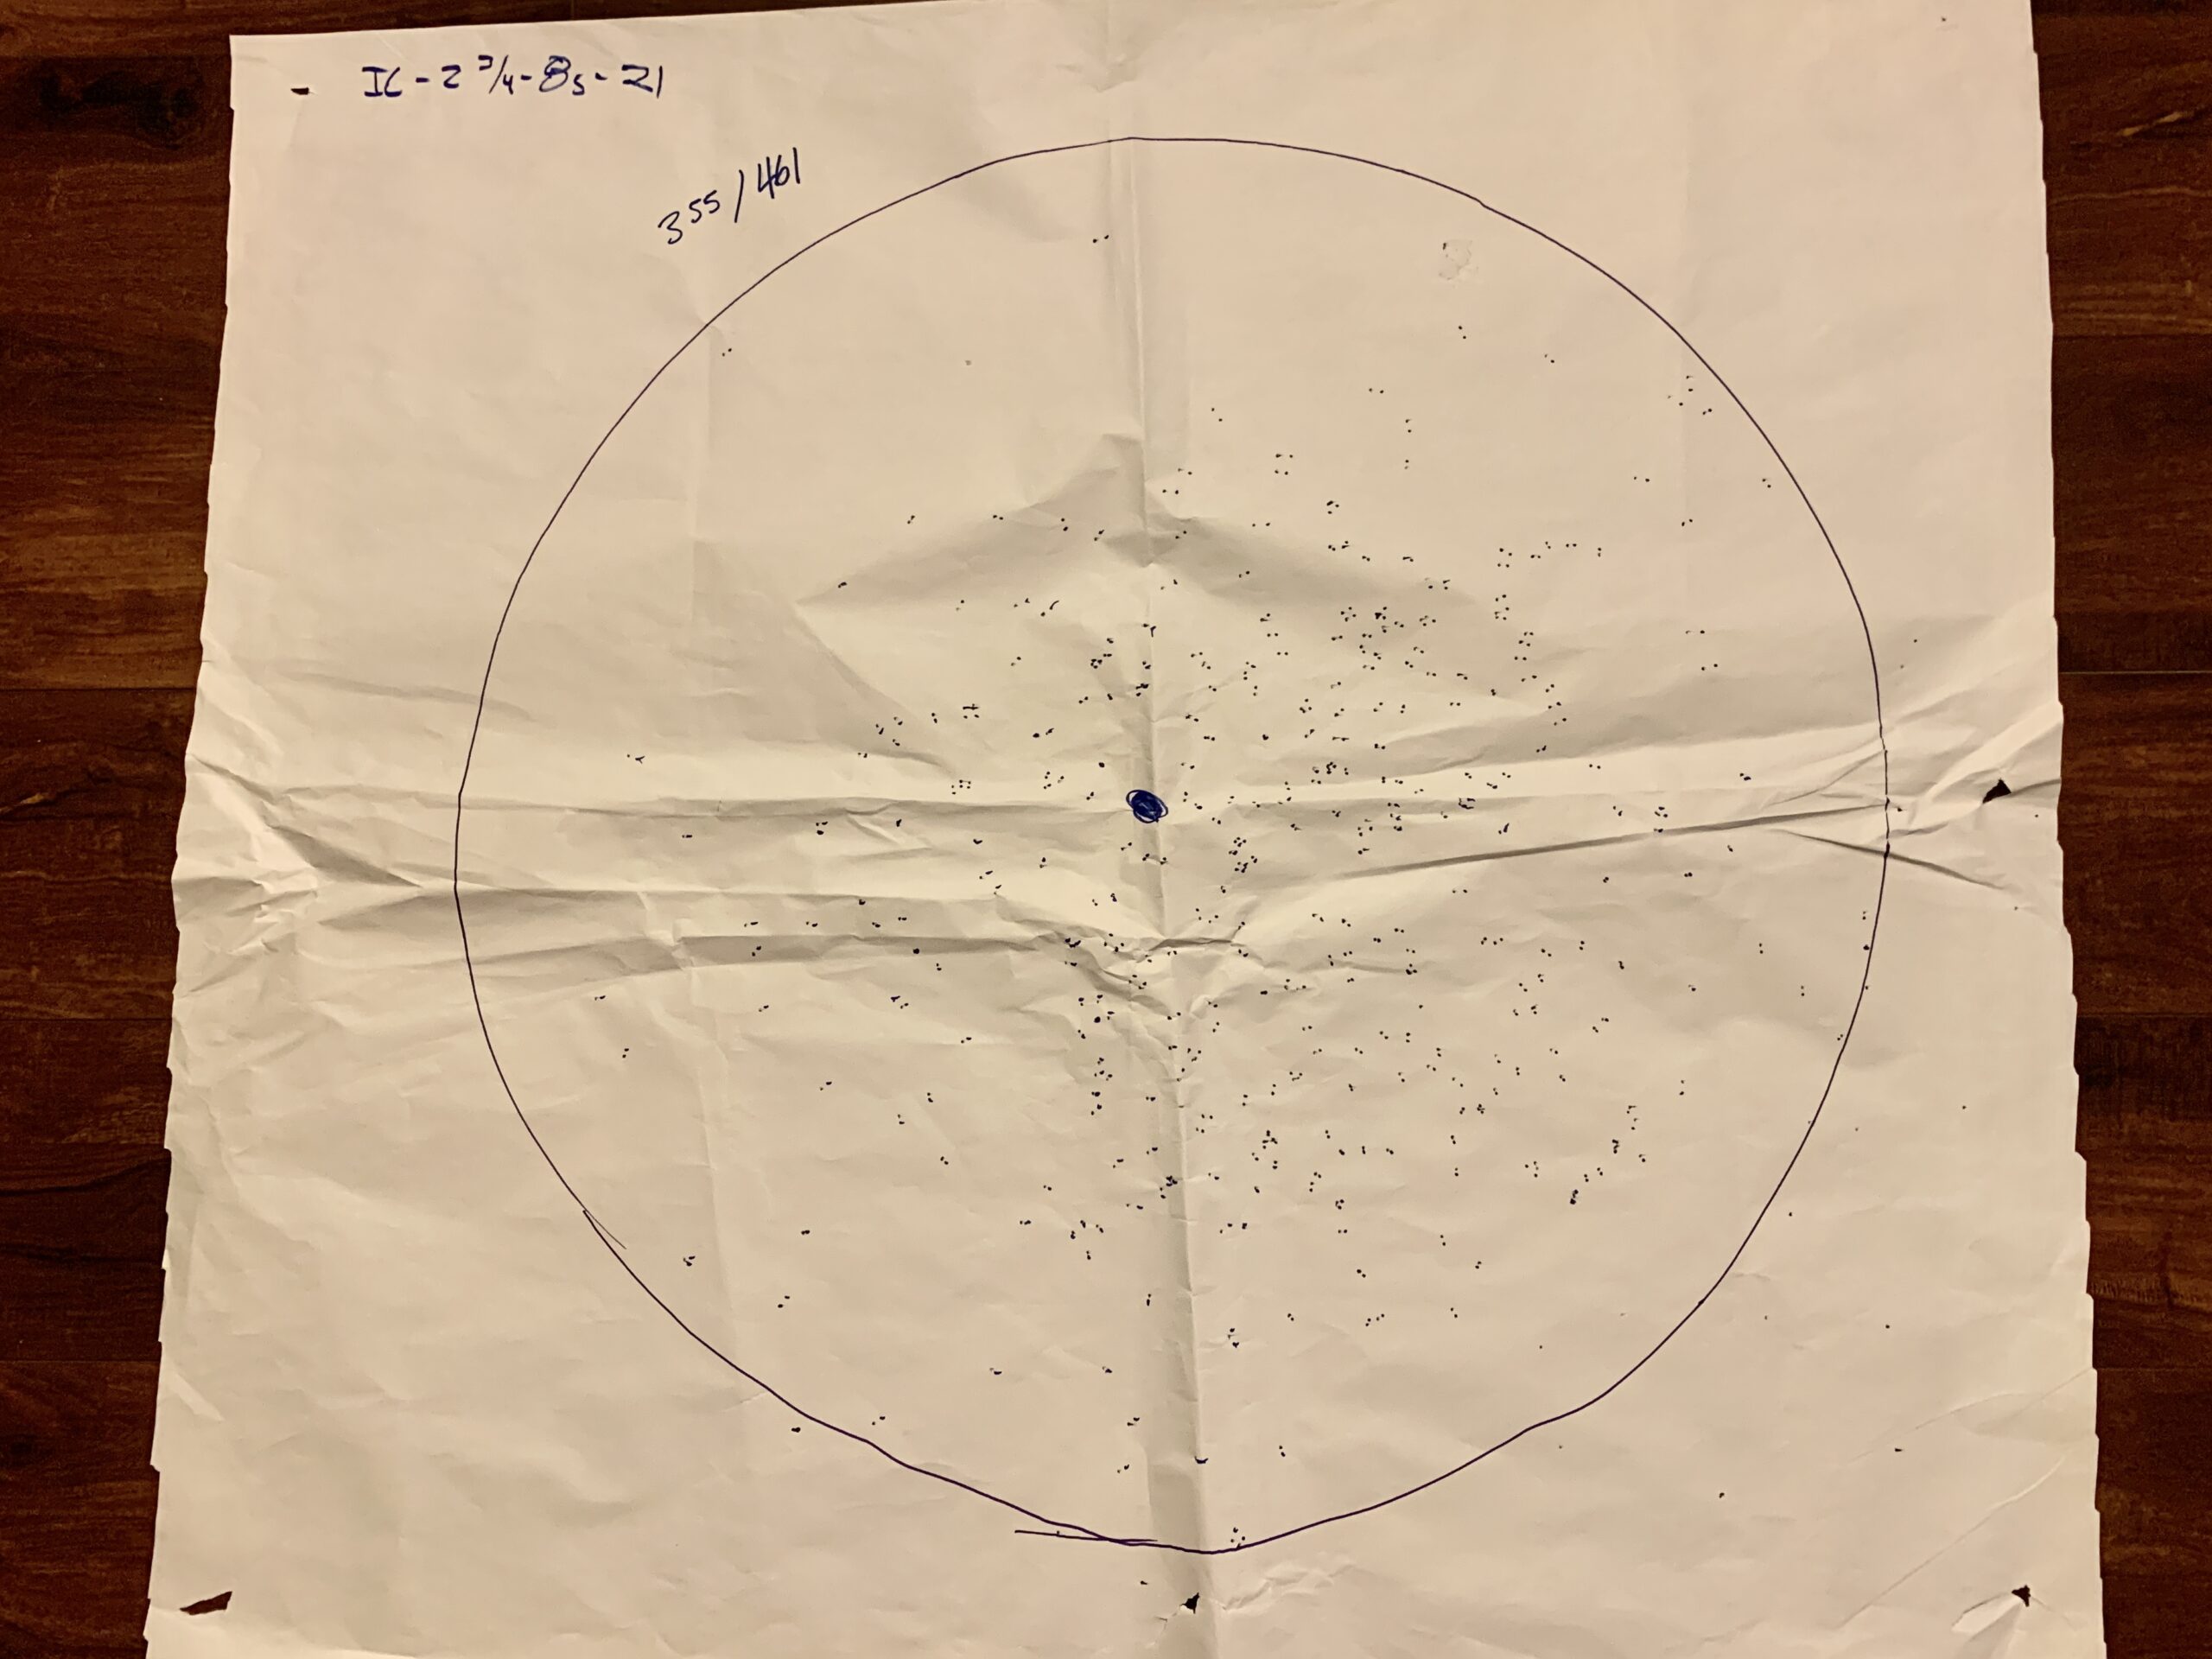 Pattern results from a 2 3/4-inch No. 8 lead target load at 21 yards through an IC choke. 